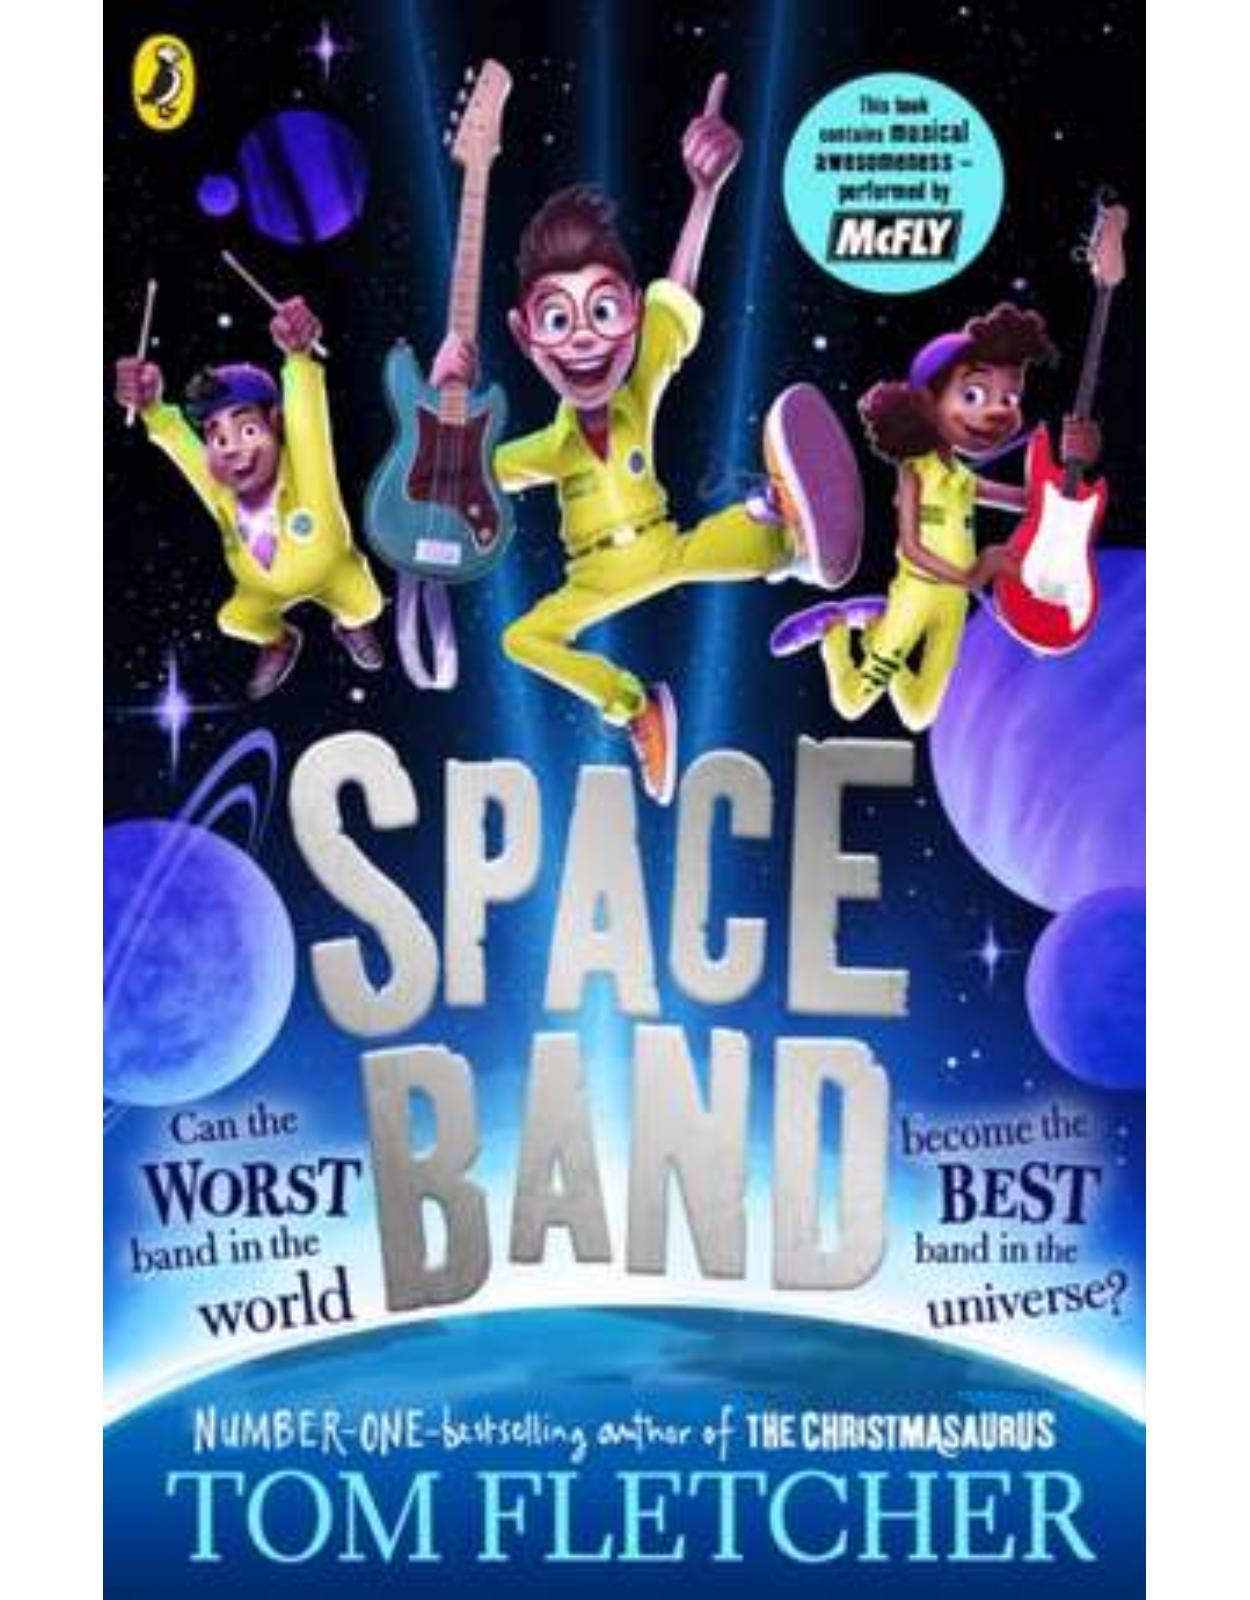 Space Band